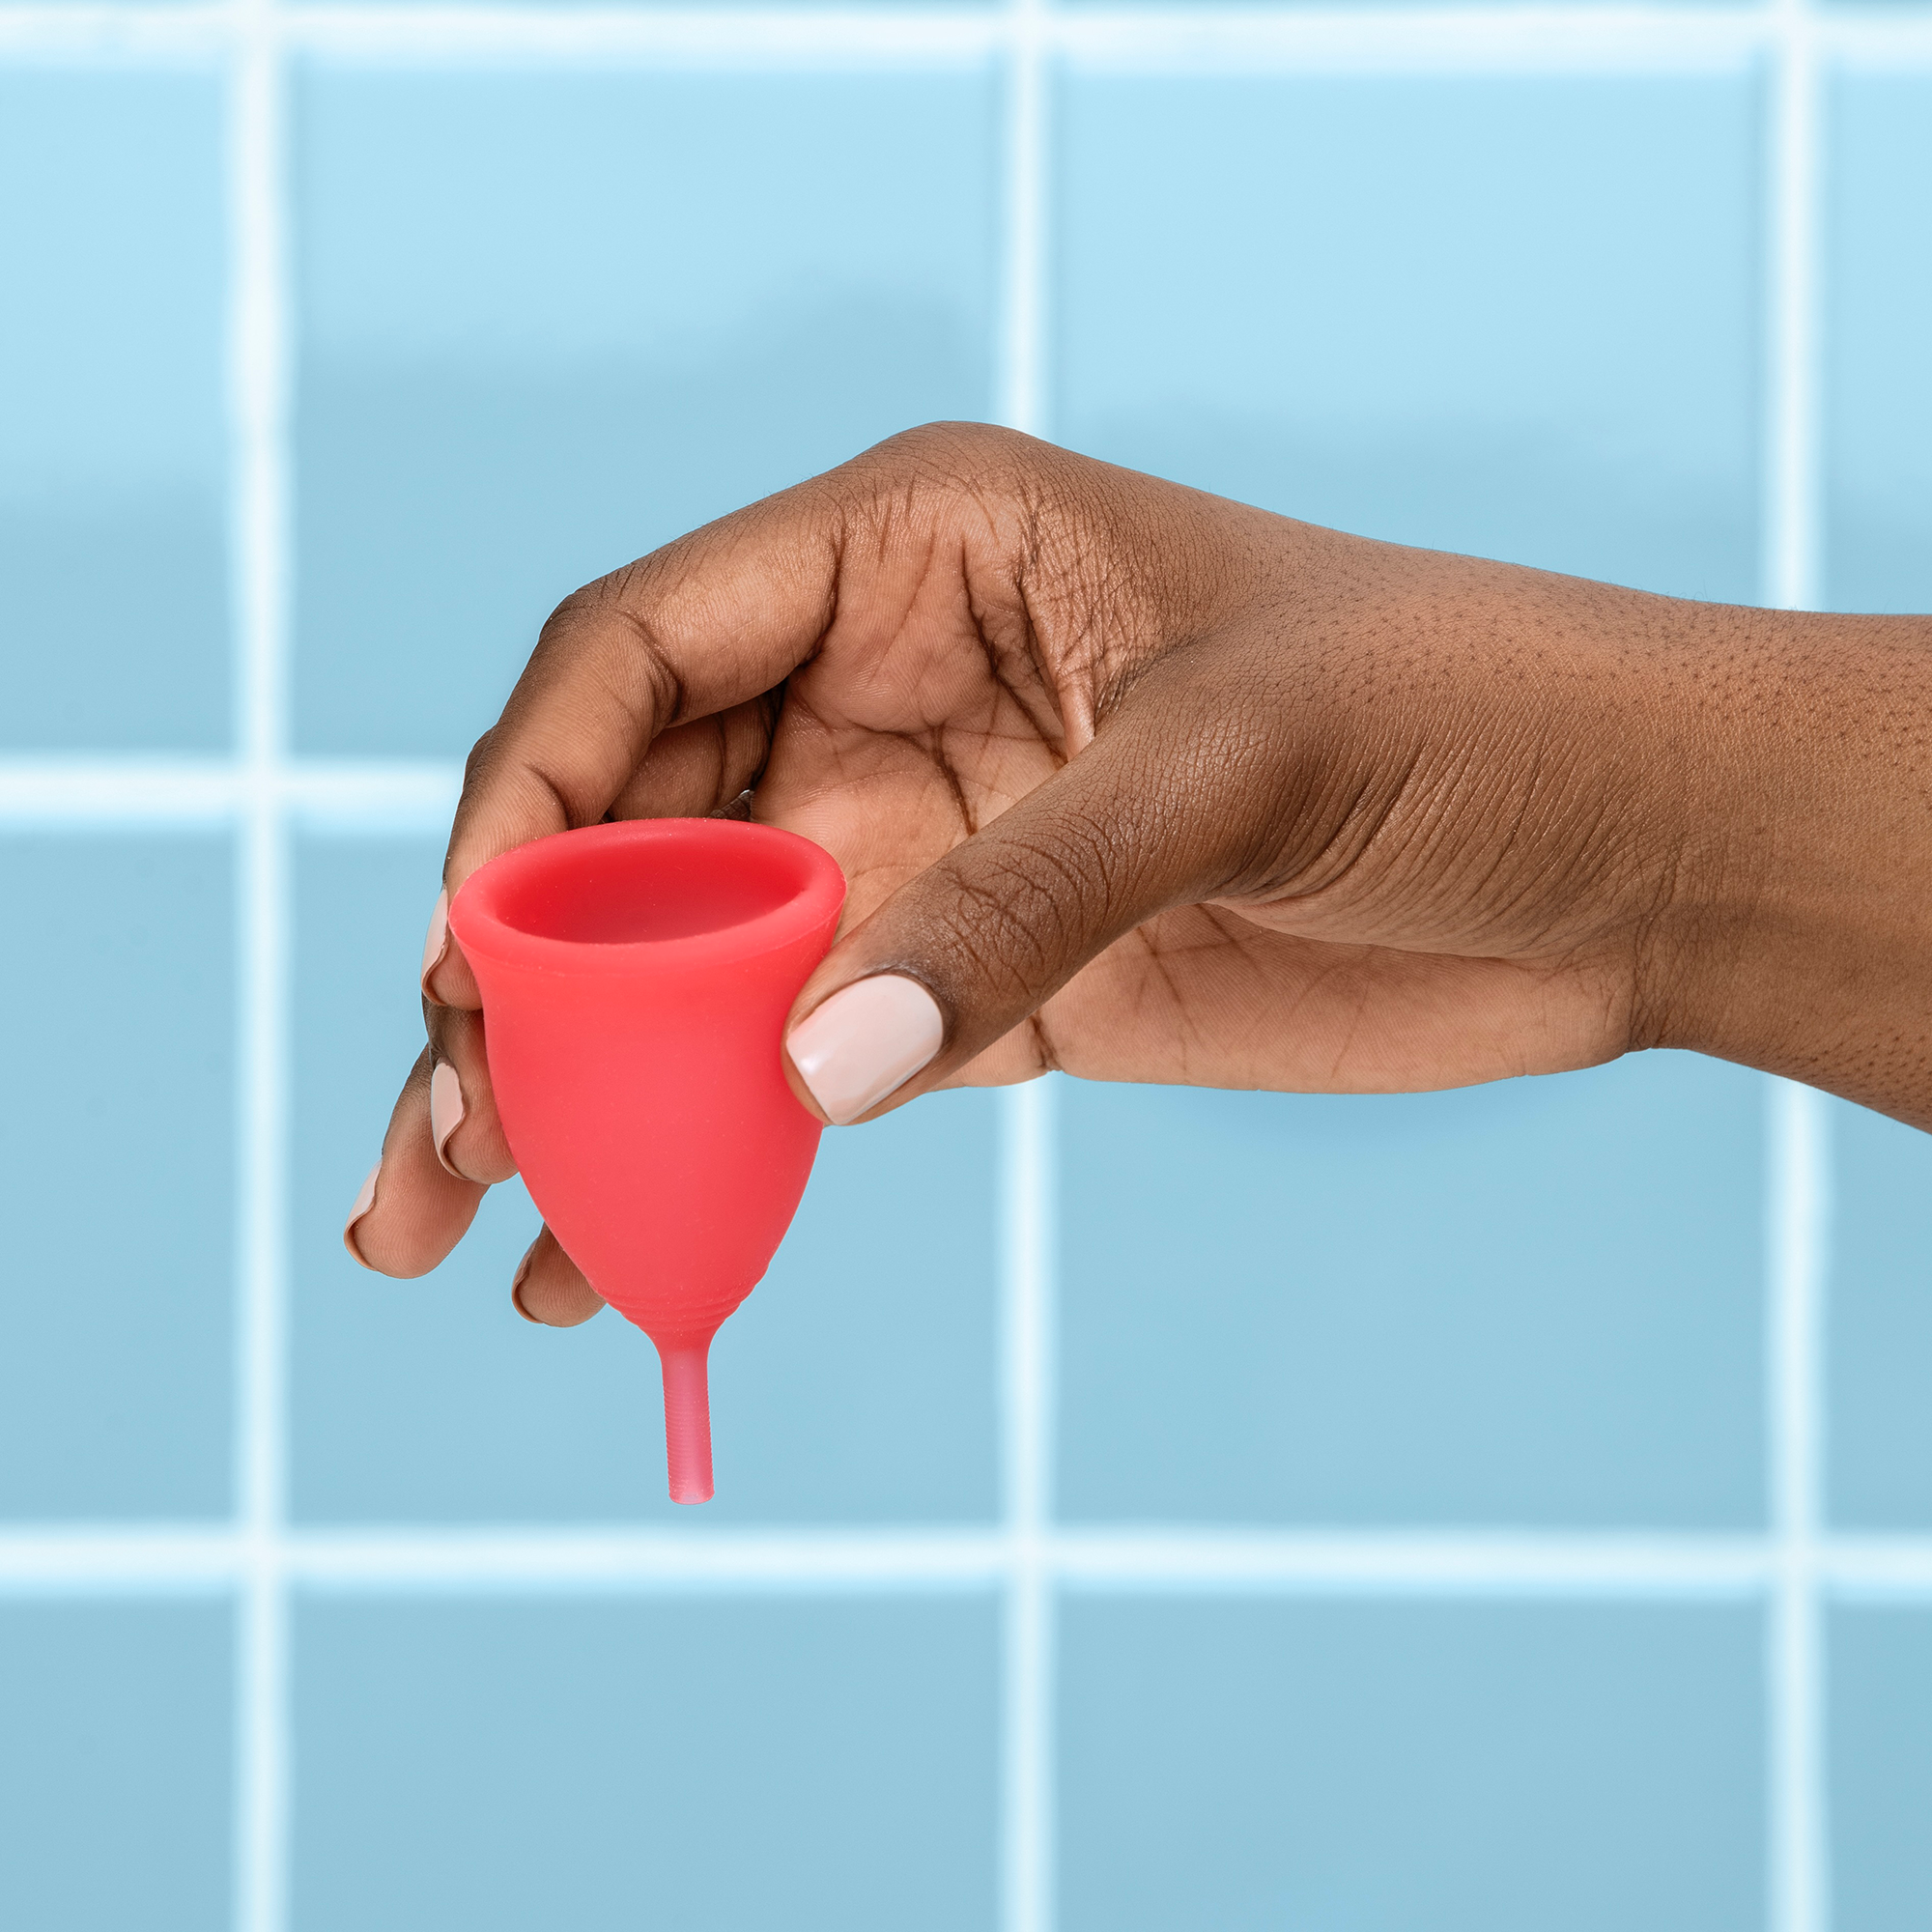 Period pants for swimming – FlowCup Menstrual Cup